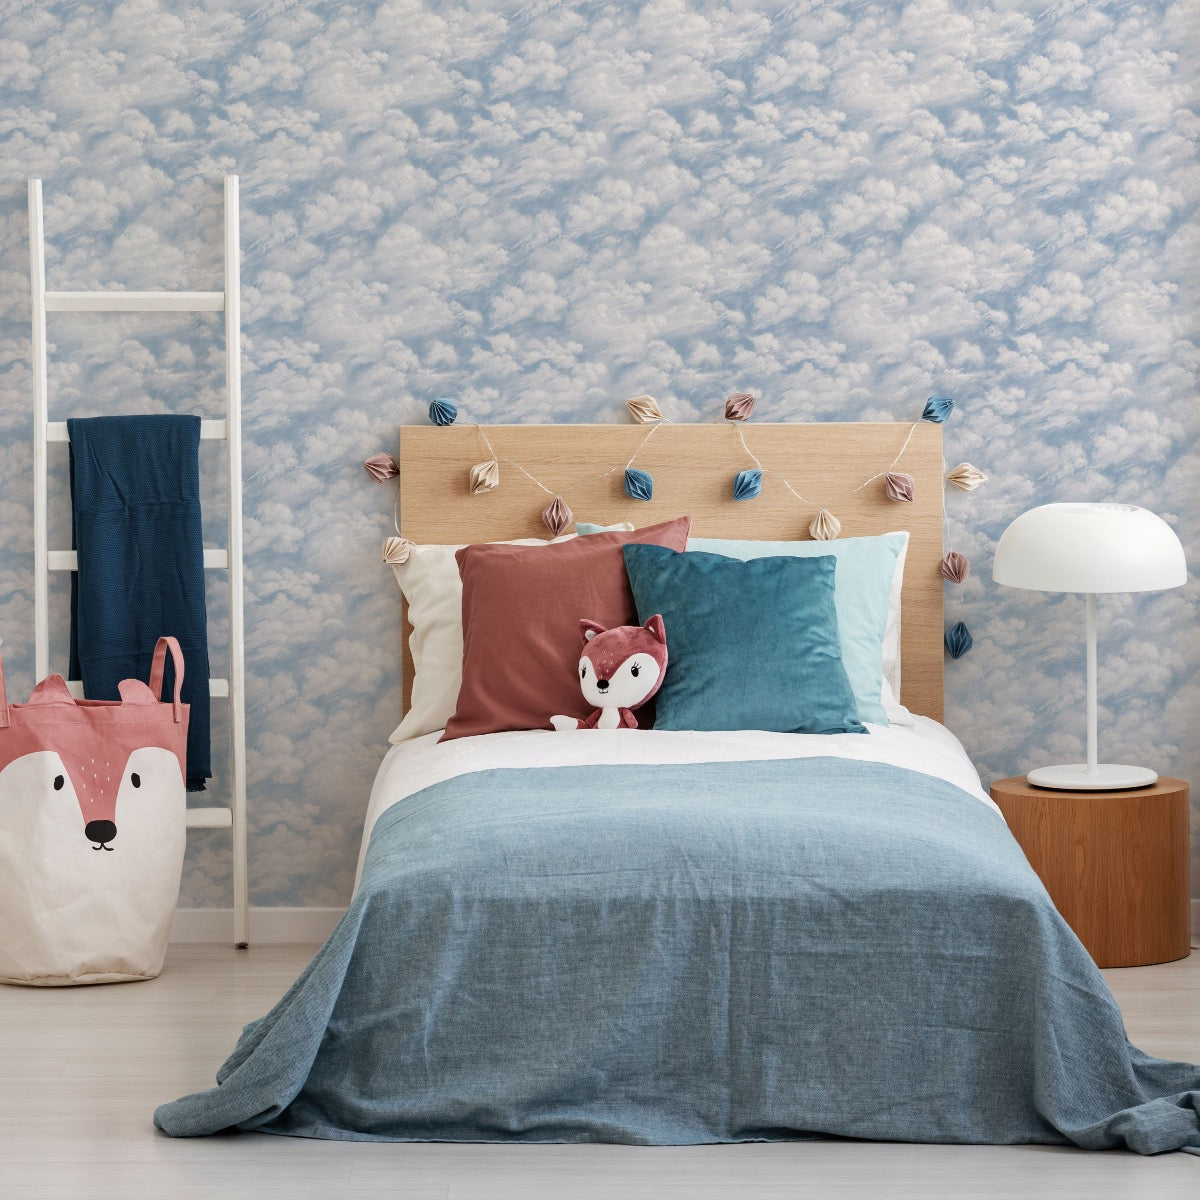 Tempaper's Clouds Peel And Stick Wall Mural in light blue shown in a kids bedroom behind a bed.